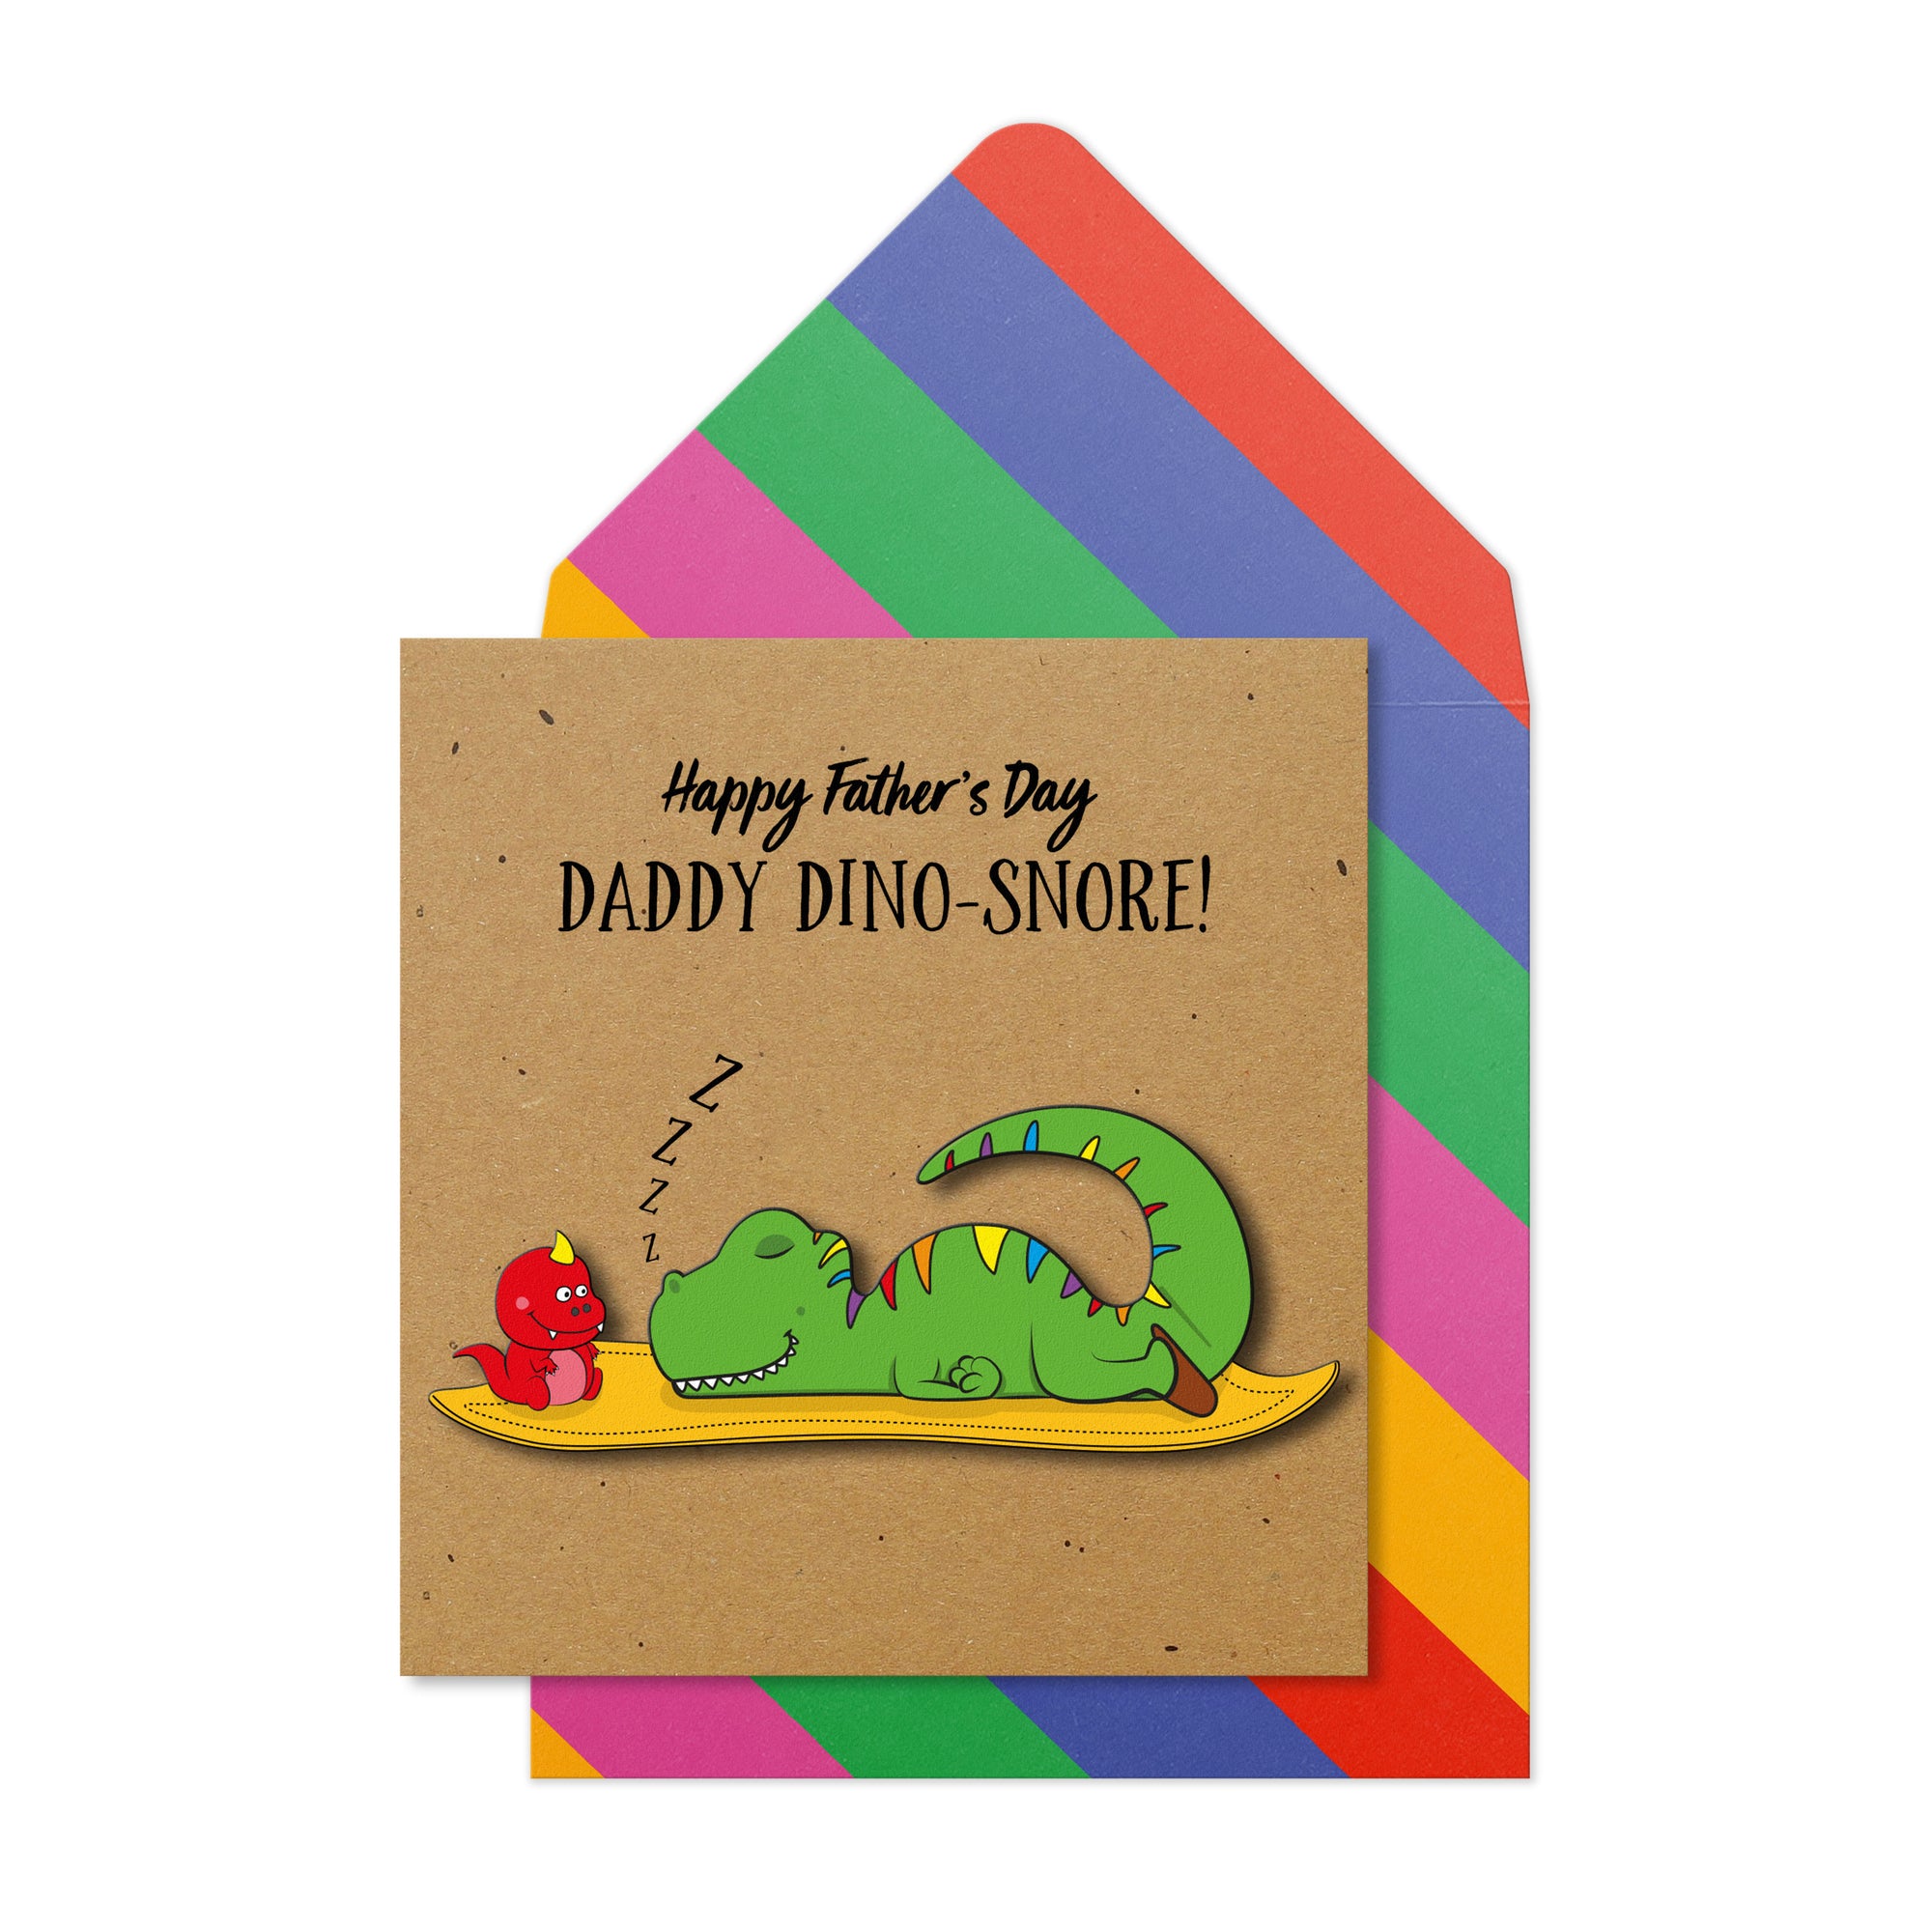 Daddy Dino-Snore